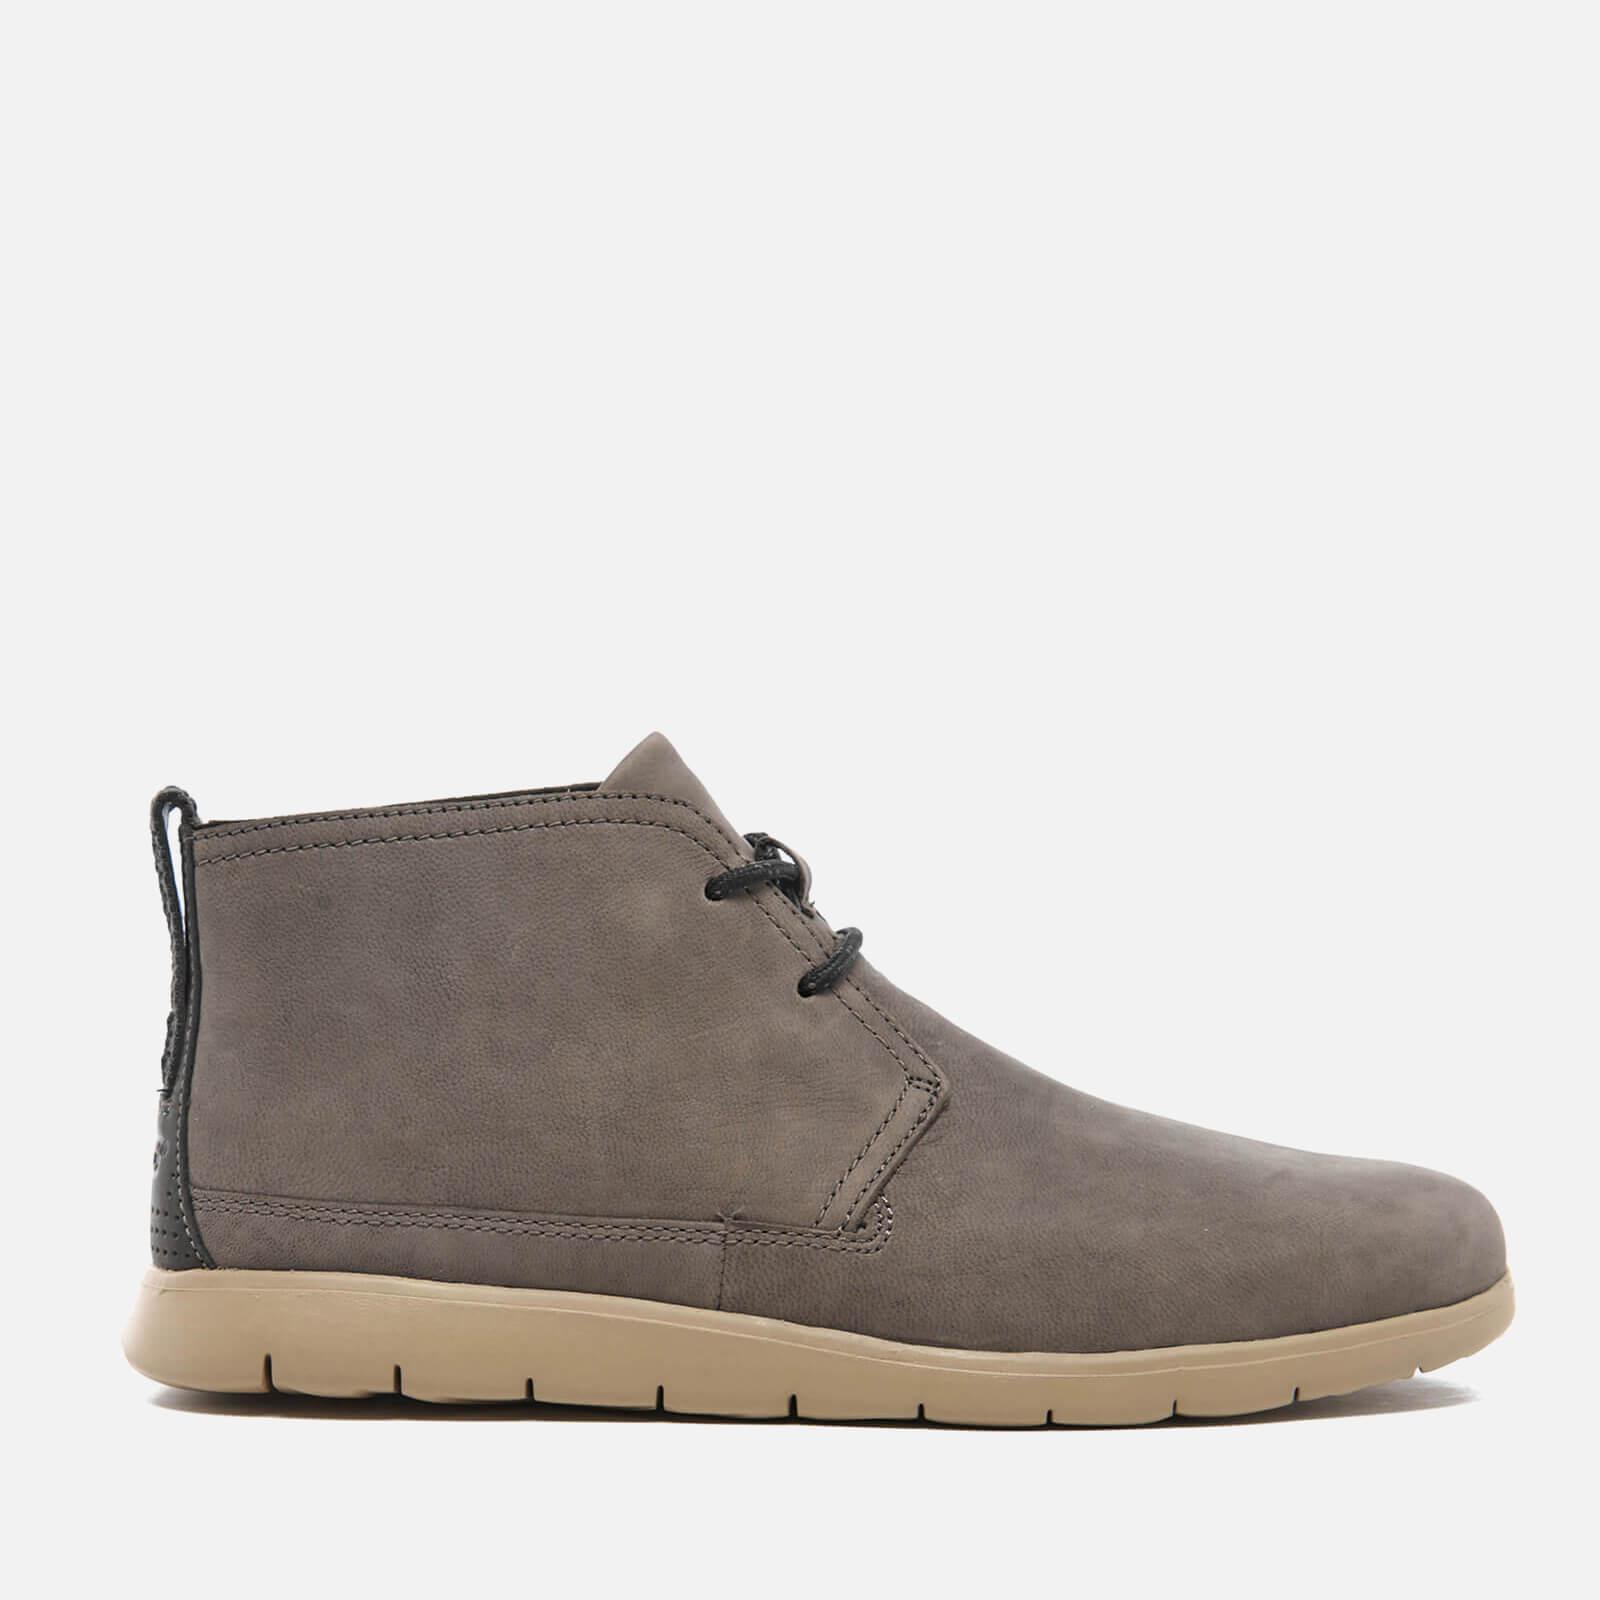 UGG Freamon Capra Treadlite Leather Chukka Boots in Brown for Men - Lyst